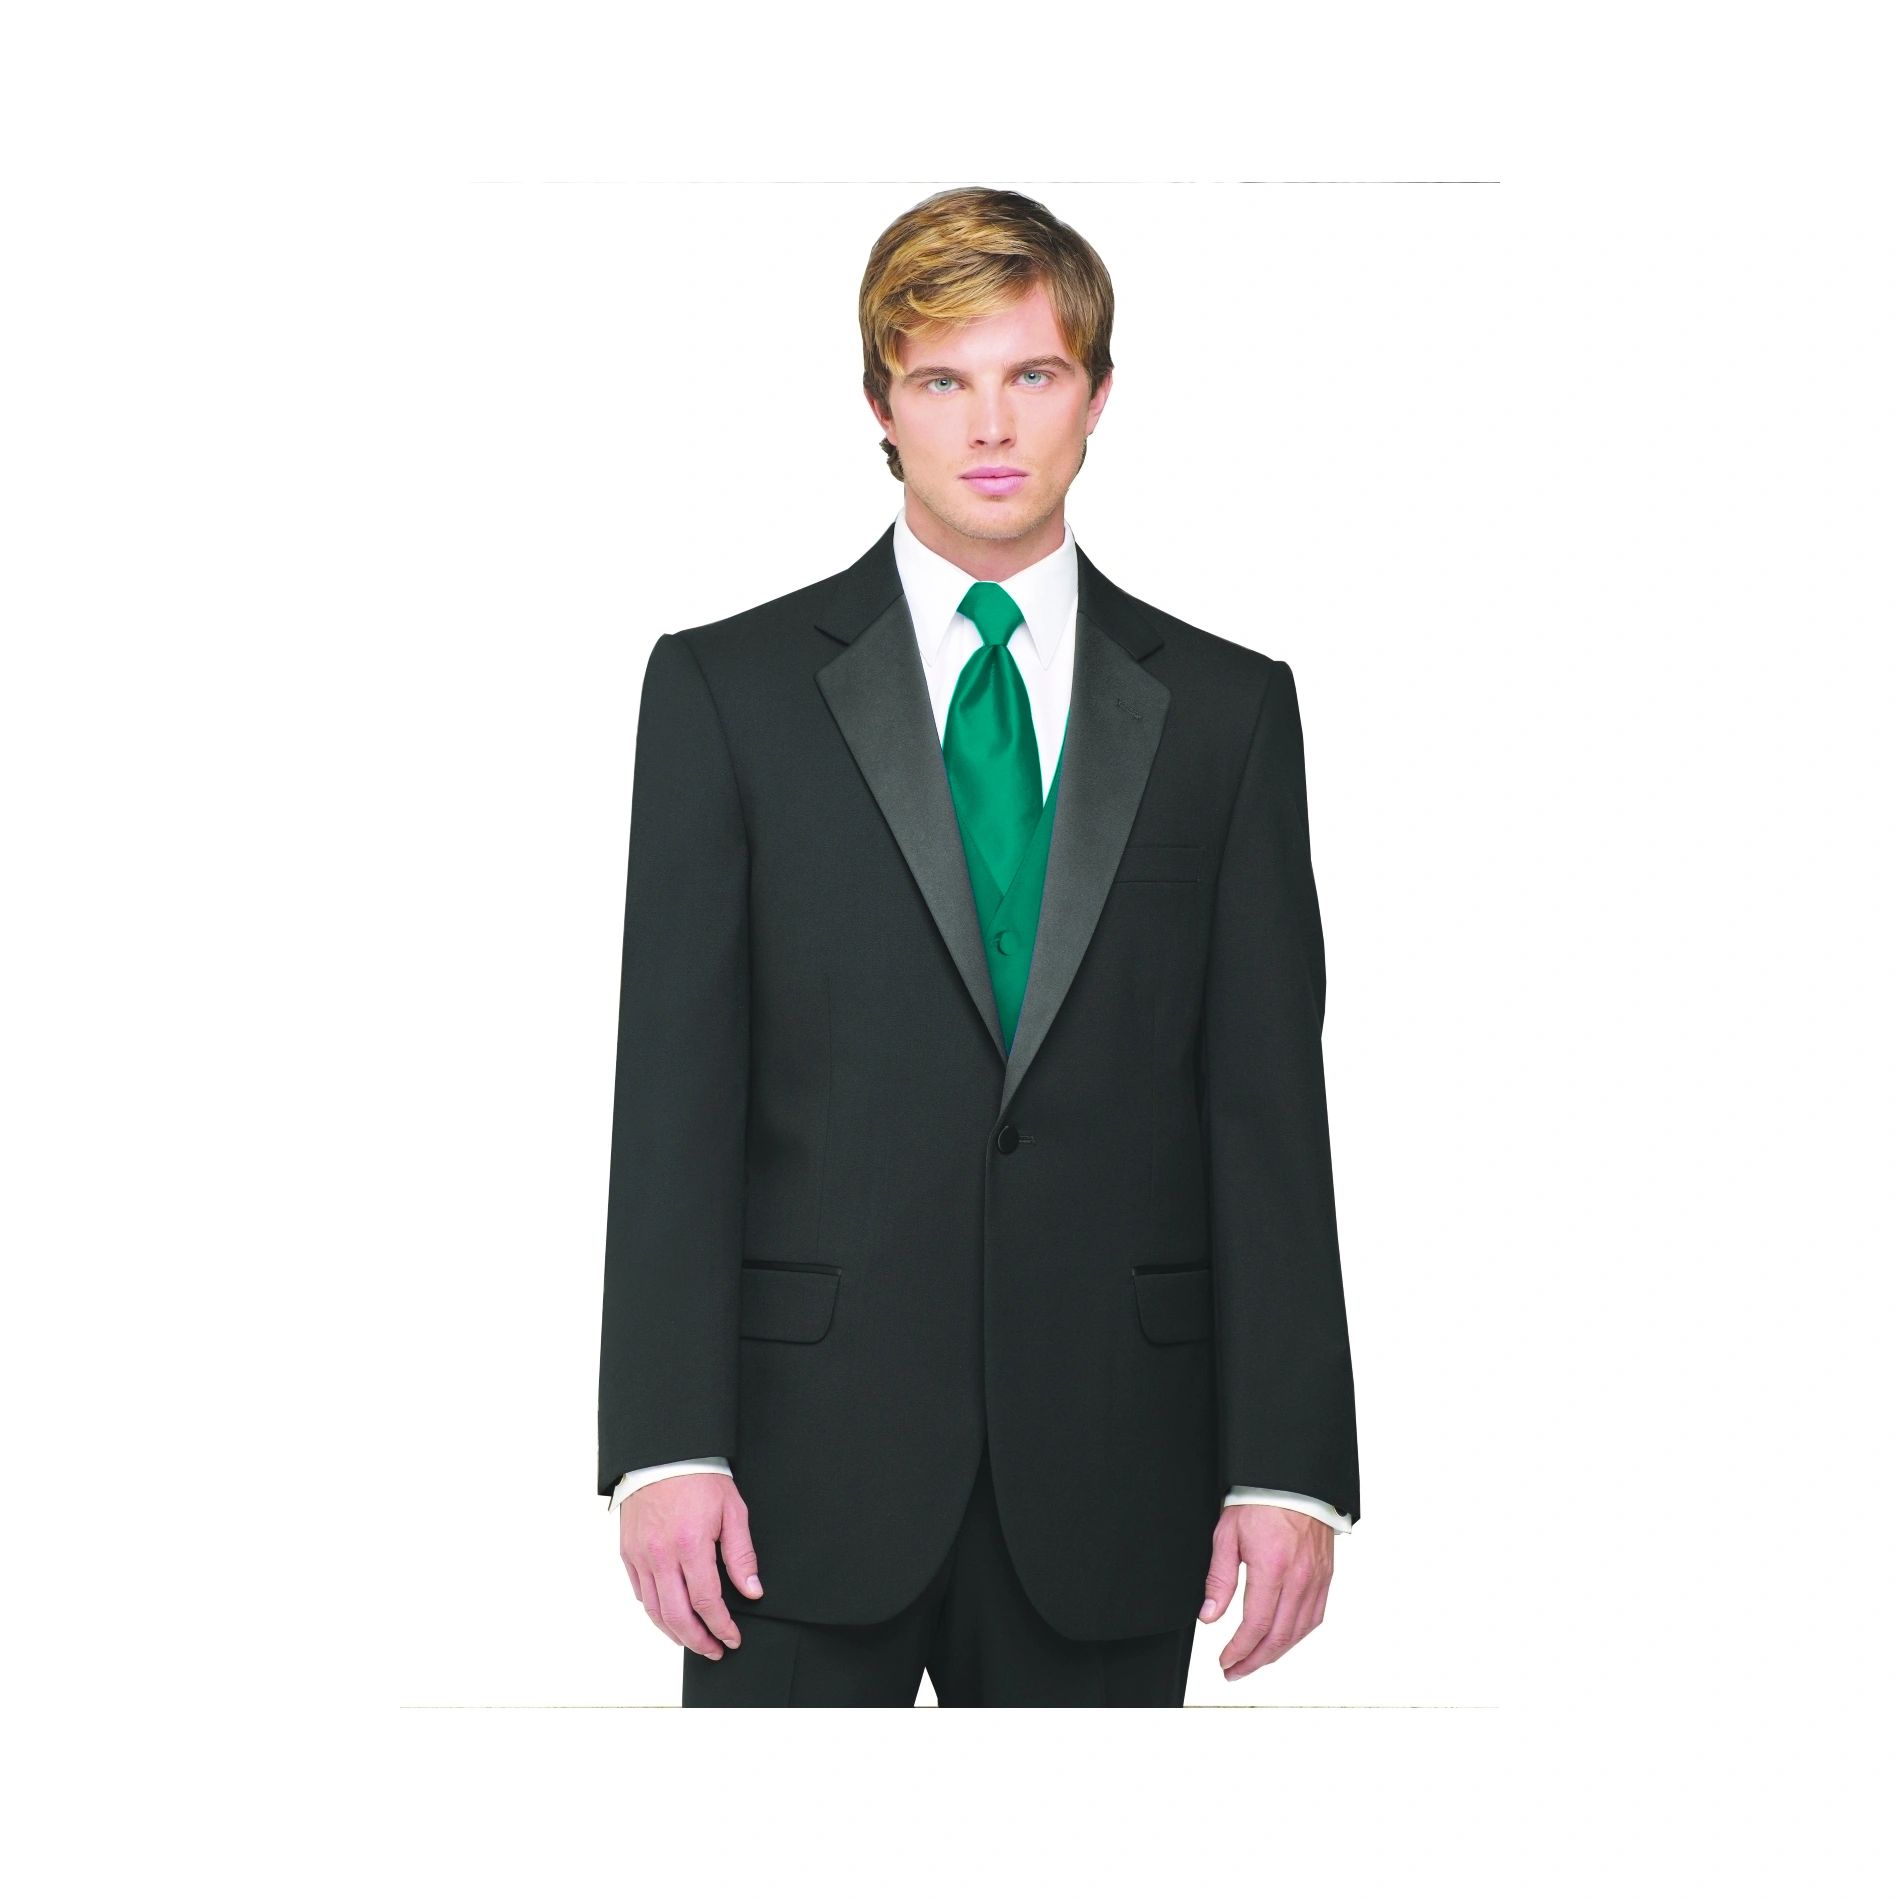 Neil Allyn 7-Piece Tuxedo with Flat Front Pants Green Vest and Tie